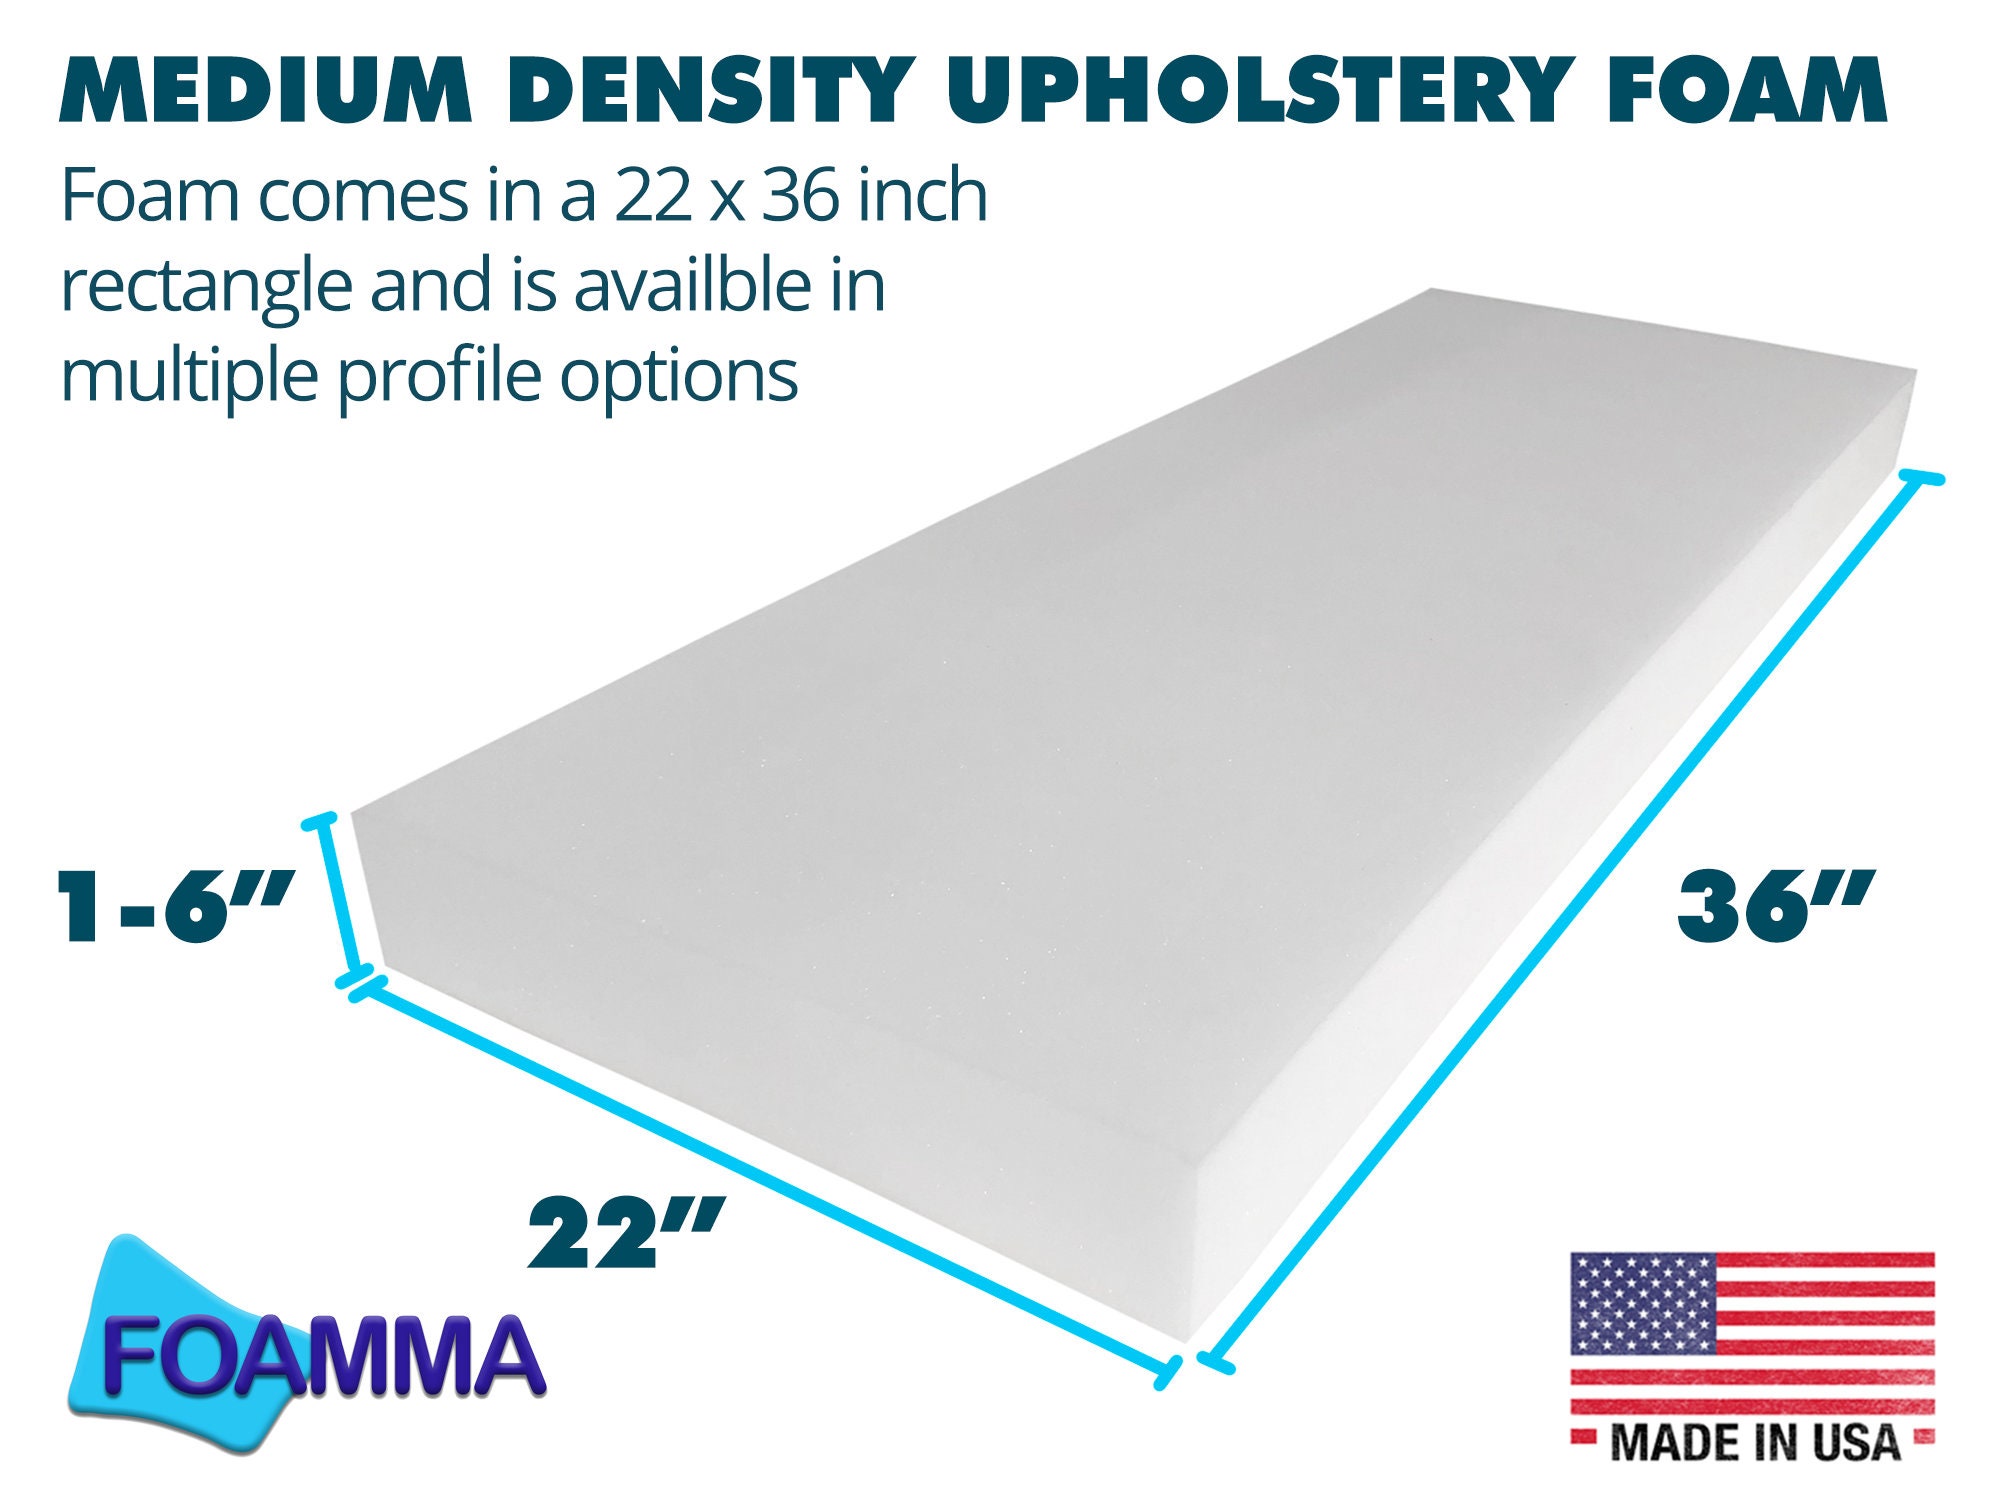 Foamy Foam High Density 1 inch Thick, 22 inch Wide, 22 inch Long Upholstery Foam, Cushion Replacement